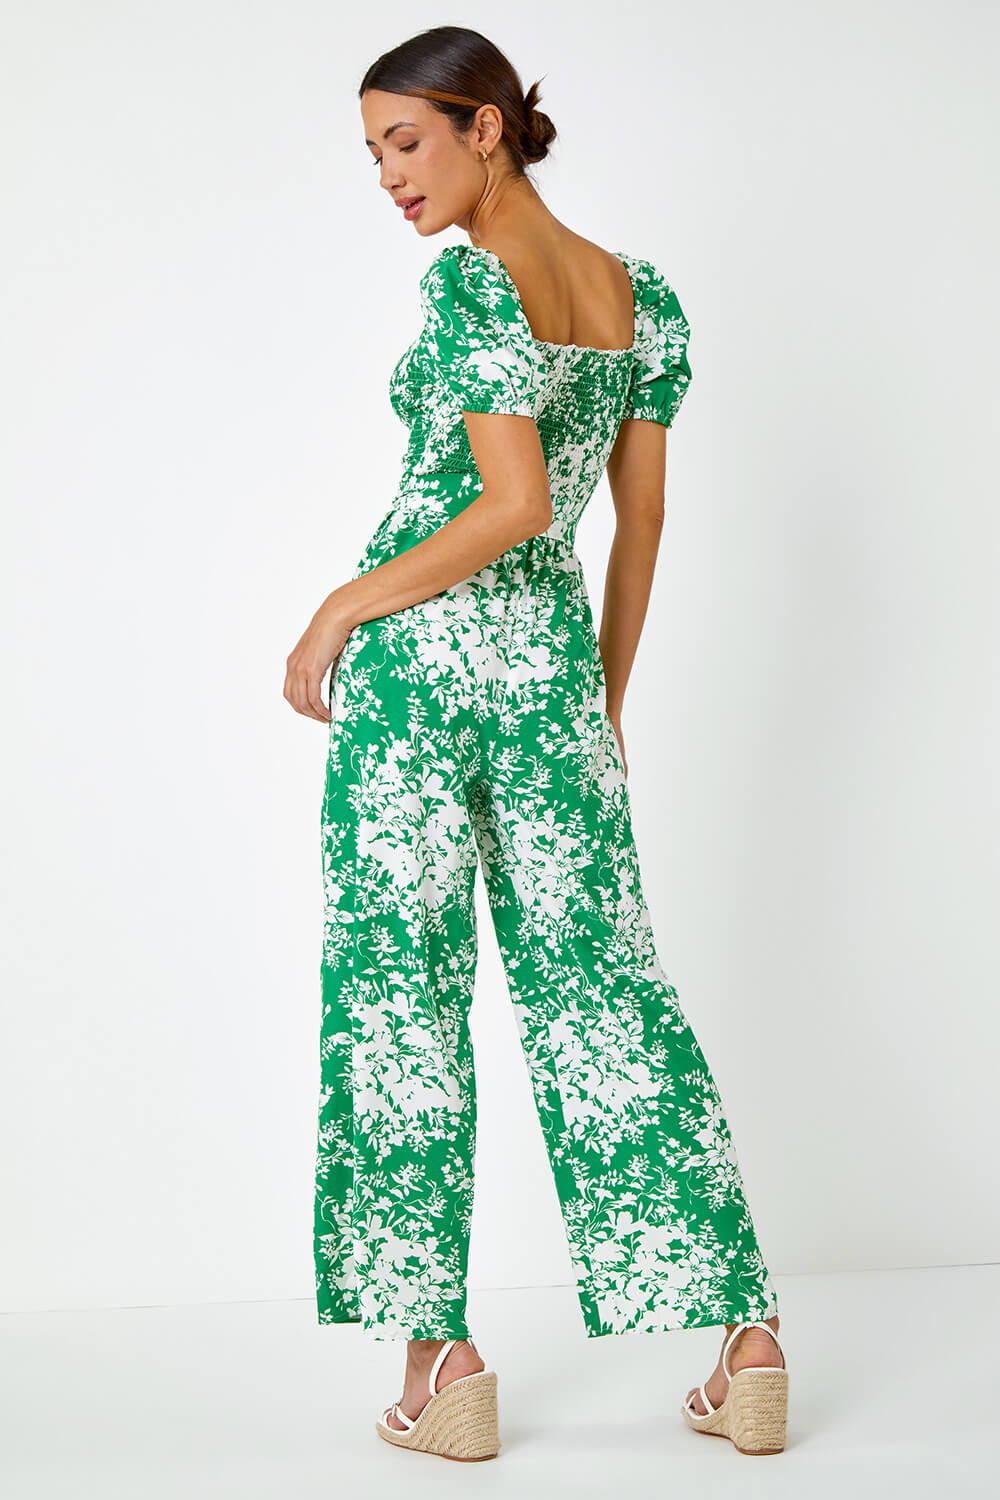 Green Ditsy Floral Stretch Shirred Jumpsuit, Image 3 of 5